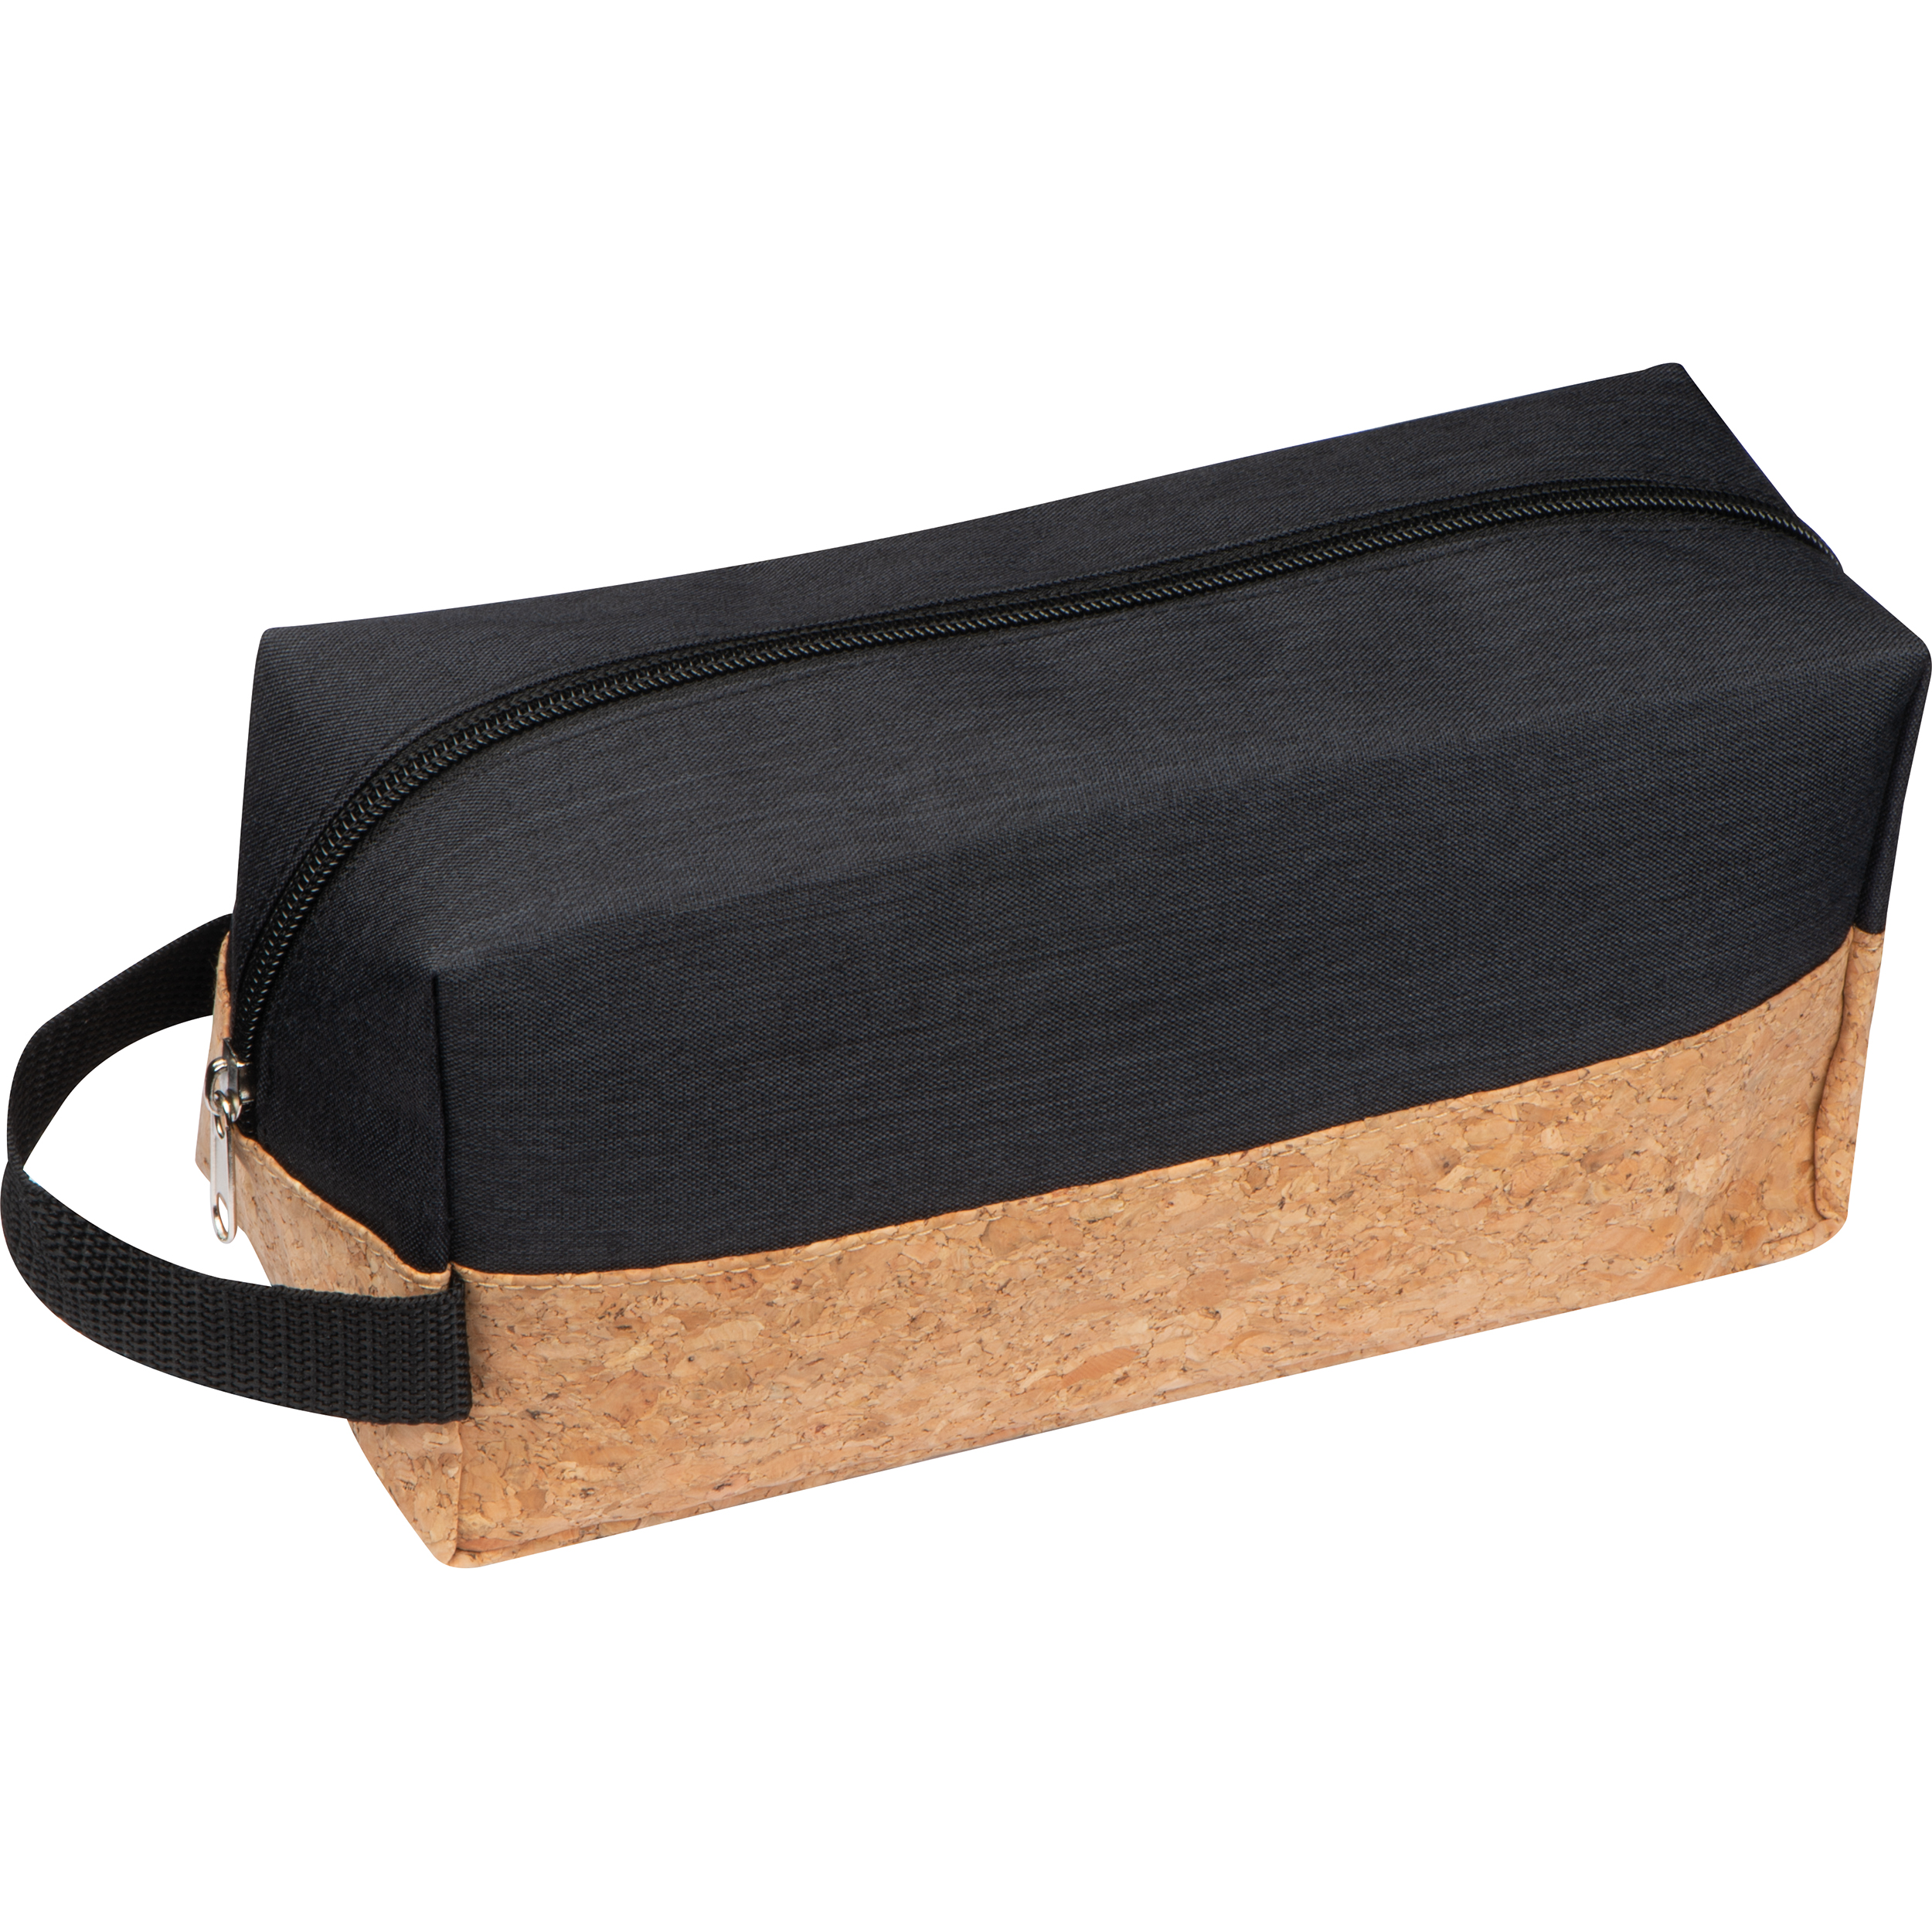 A travel cosmetic bag with a cork bottom - Churchill - Wells-next-the-Sea